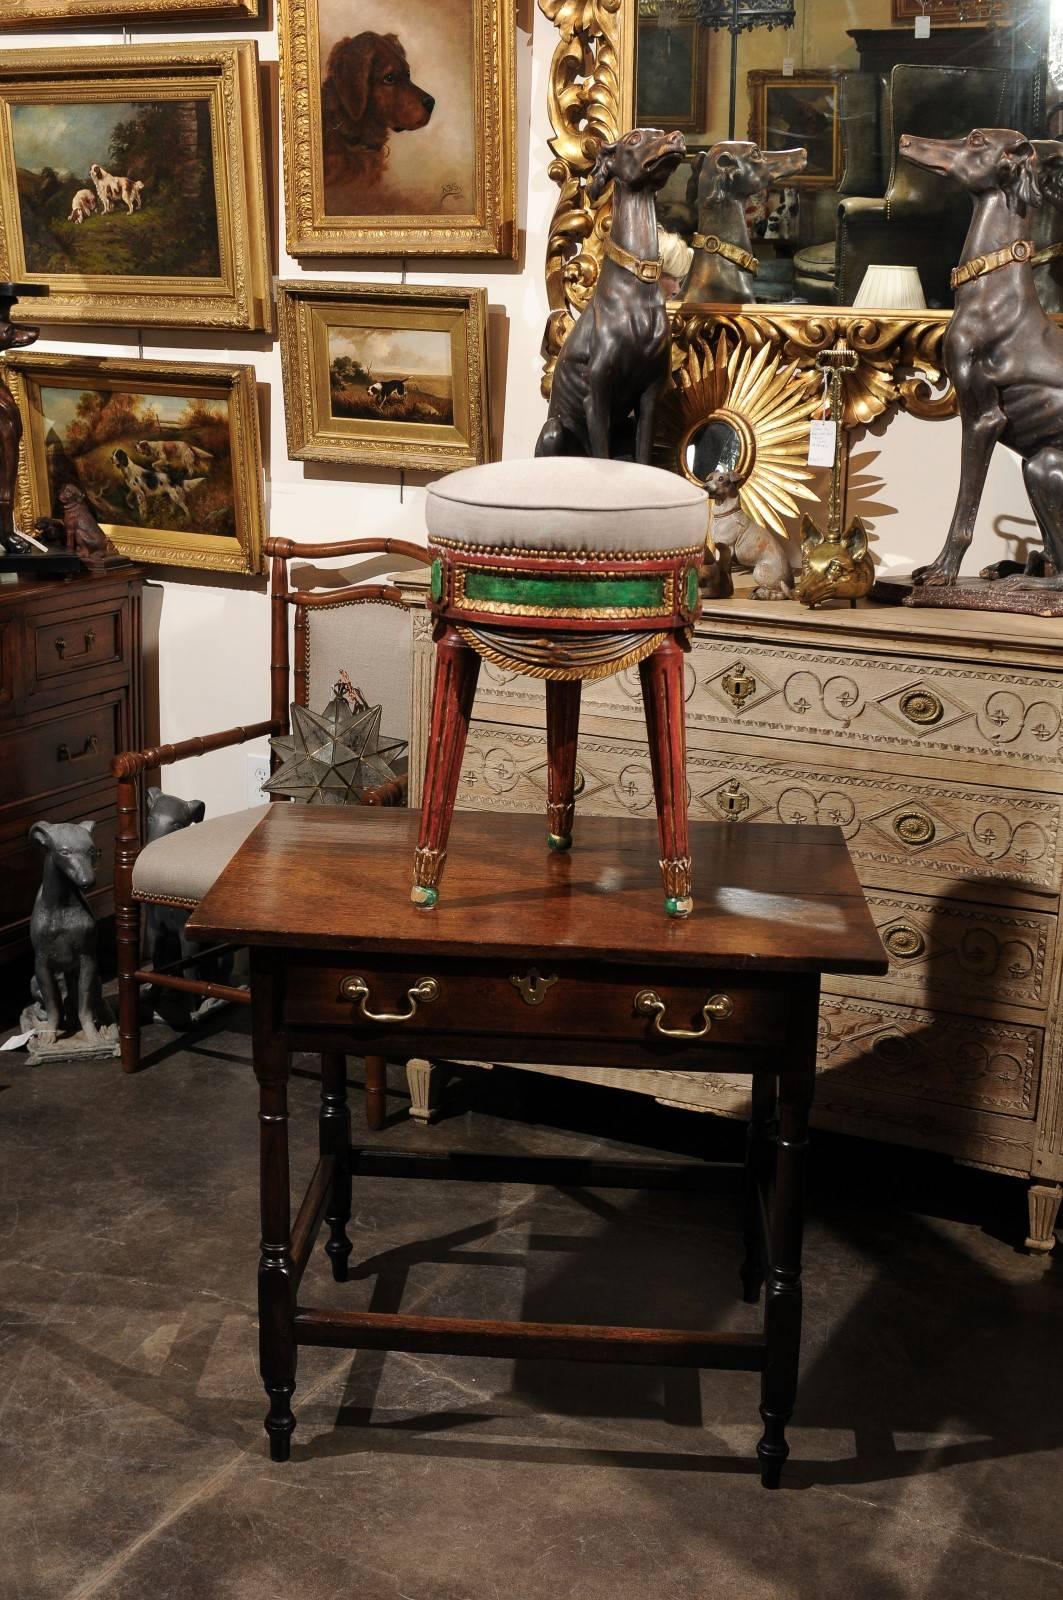 Italian Venetian Red and Green Painted Wood Upholstered Stool with Gilt Accents